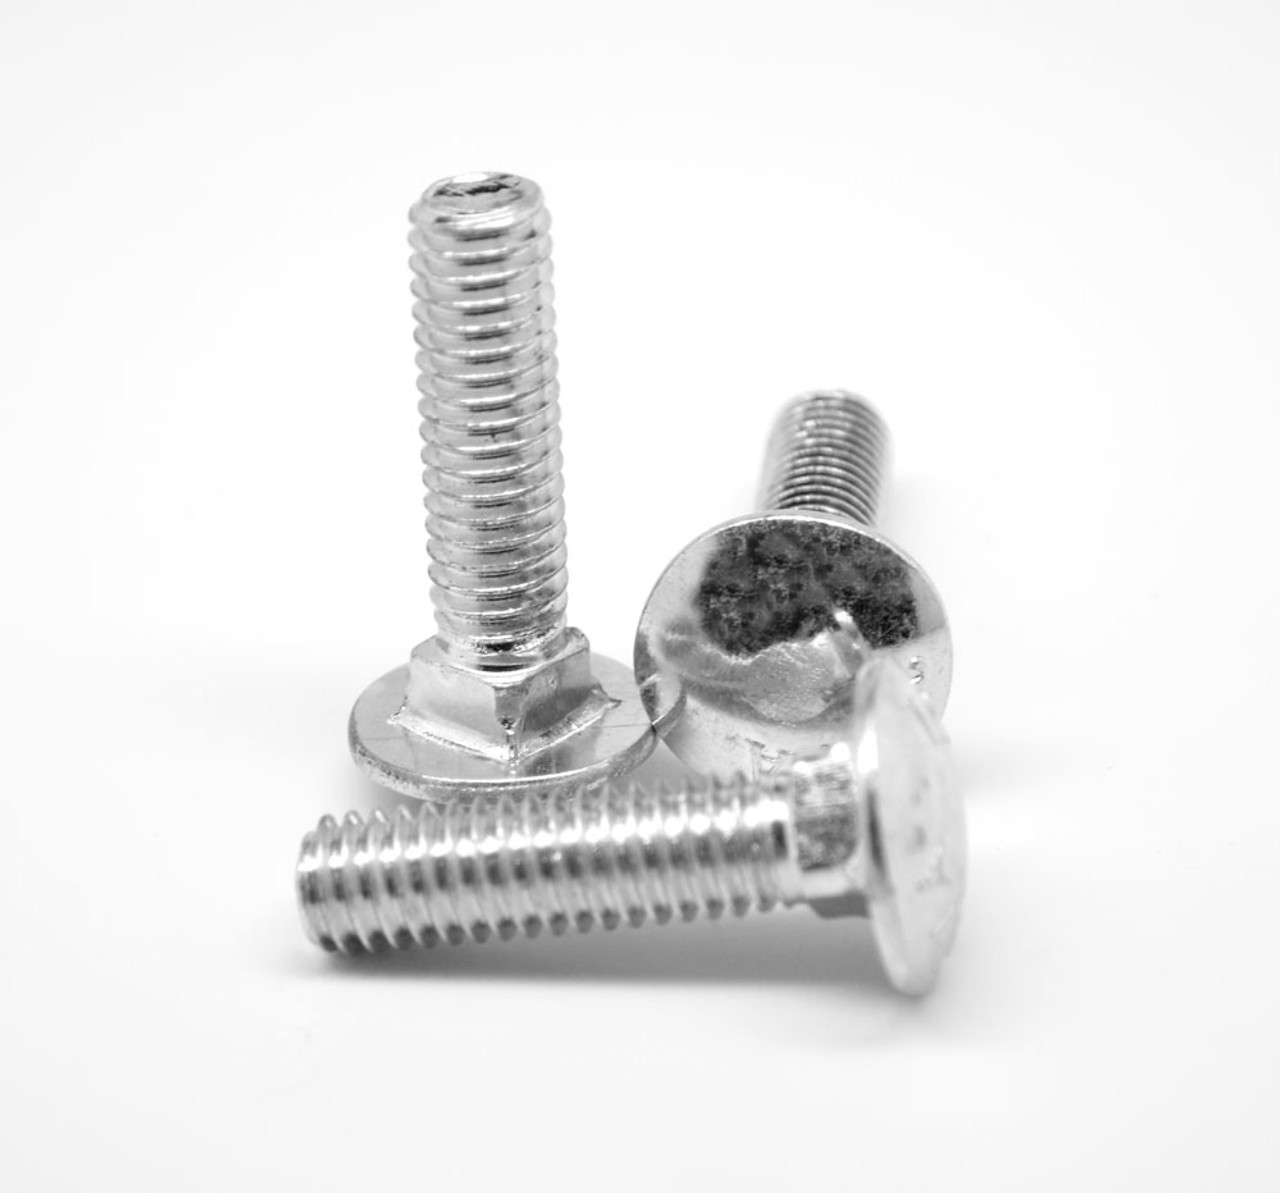 5/16"-18 x 5" (FT) Coarse Thread A307 Grade A Carriage Bolt Low Carbon Steel Zinc Plated